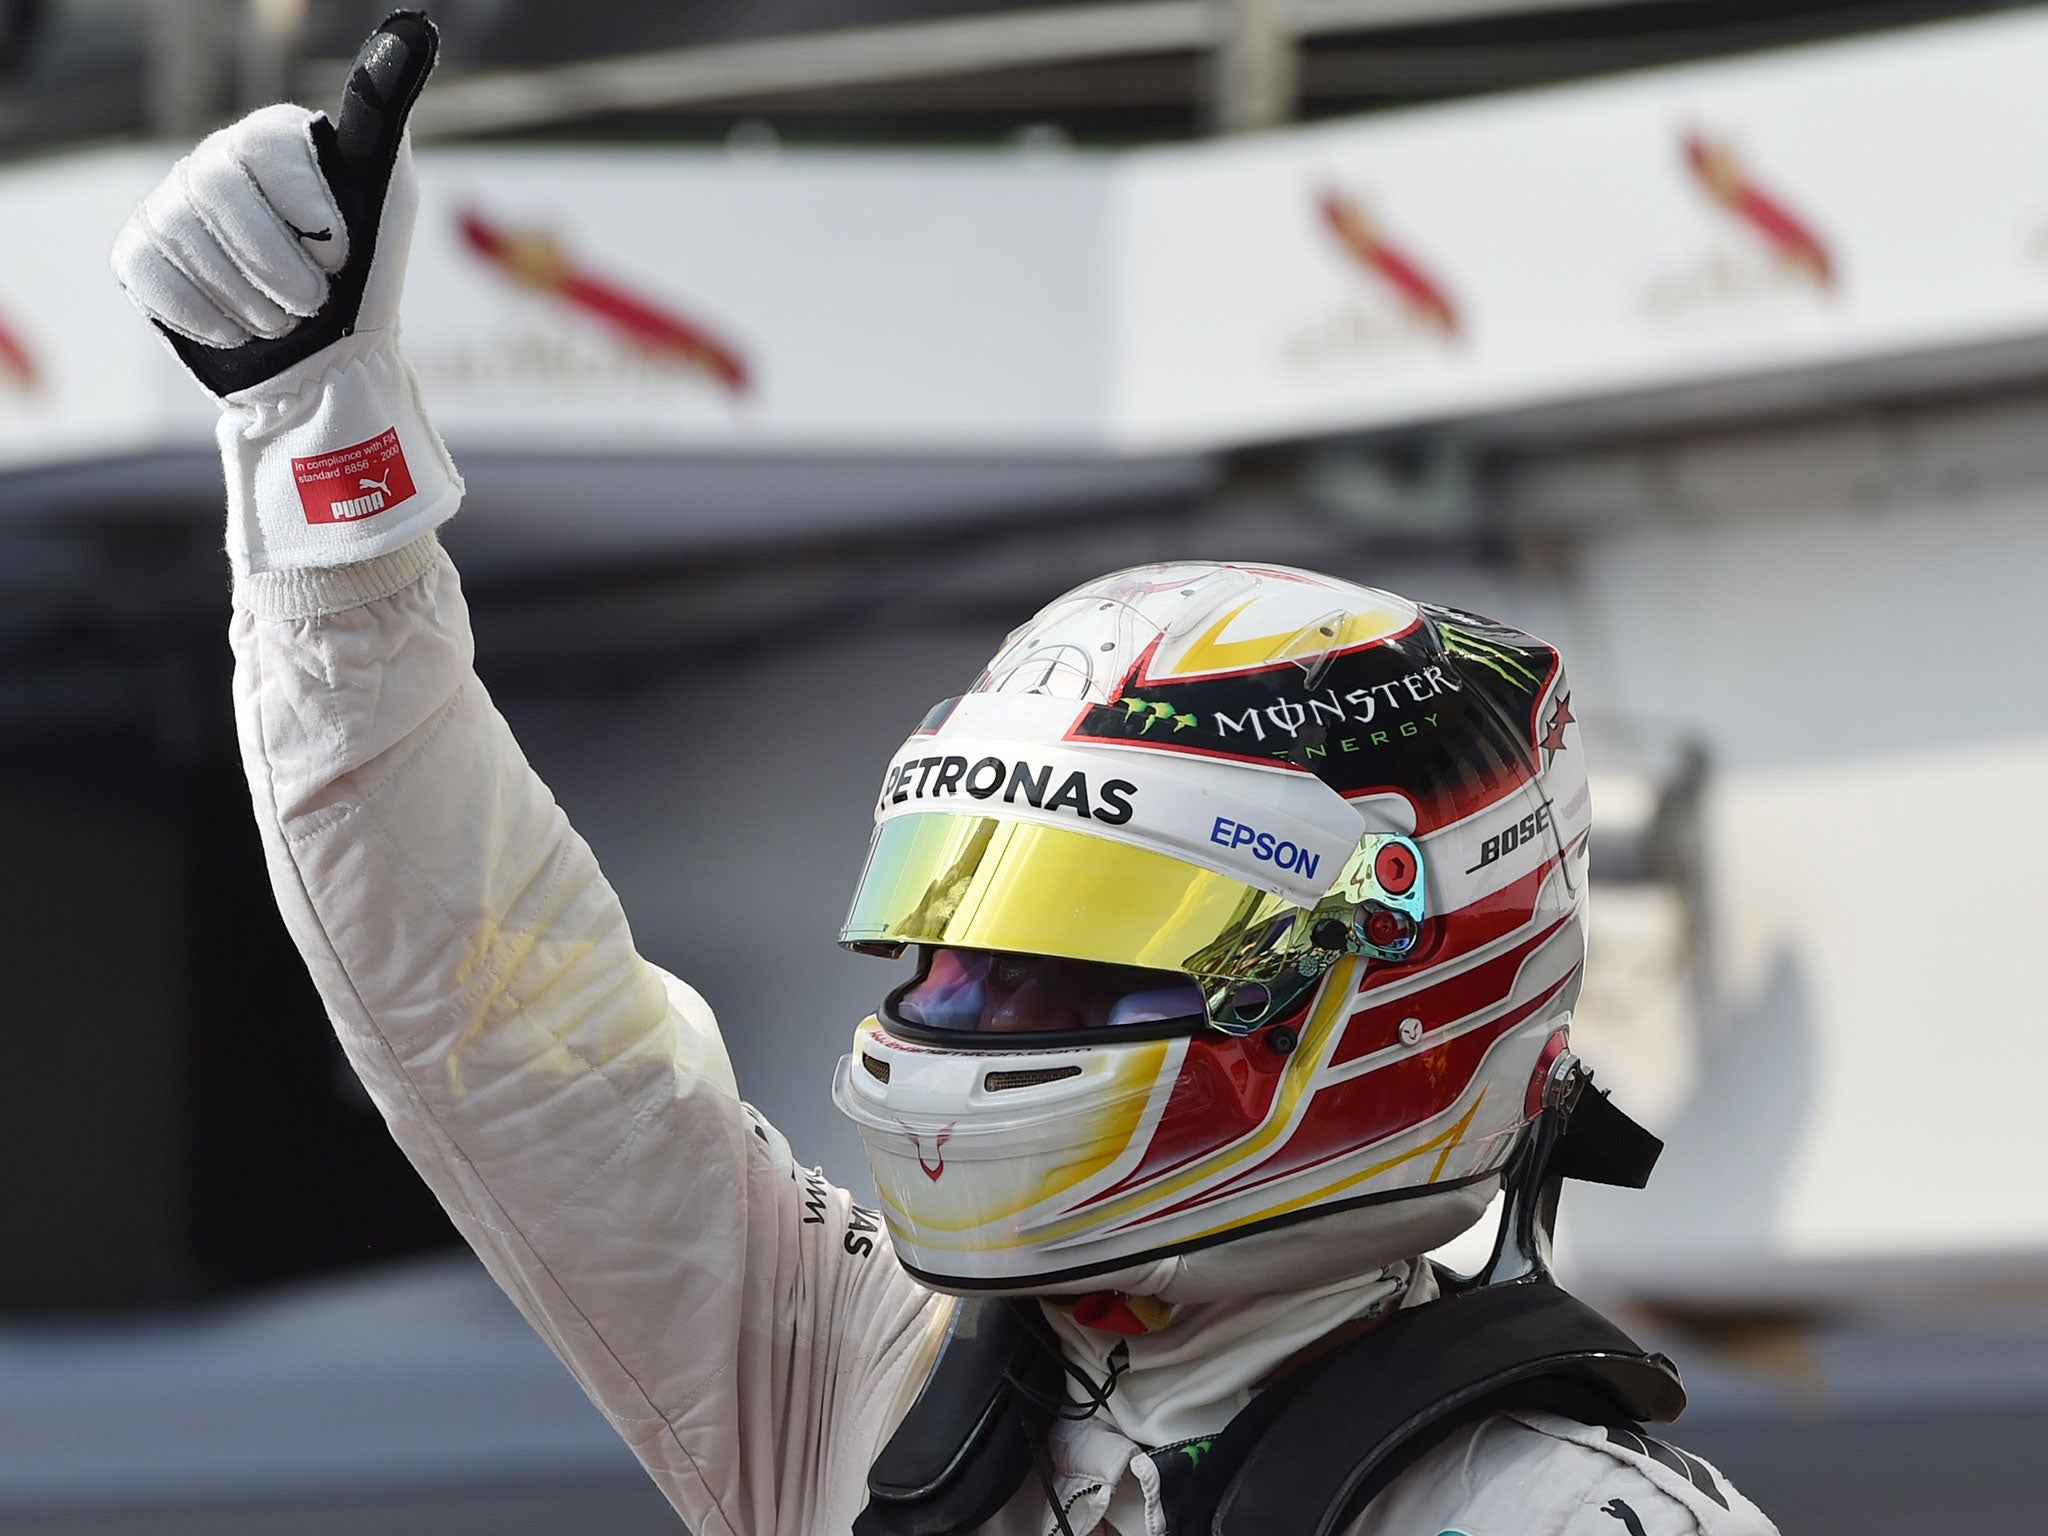 Lewis Hamilton will start the Hungarian Grand Prix from pole